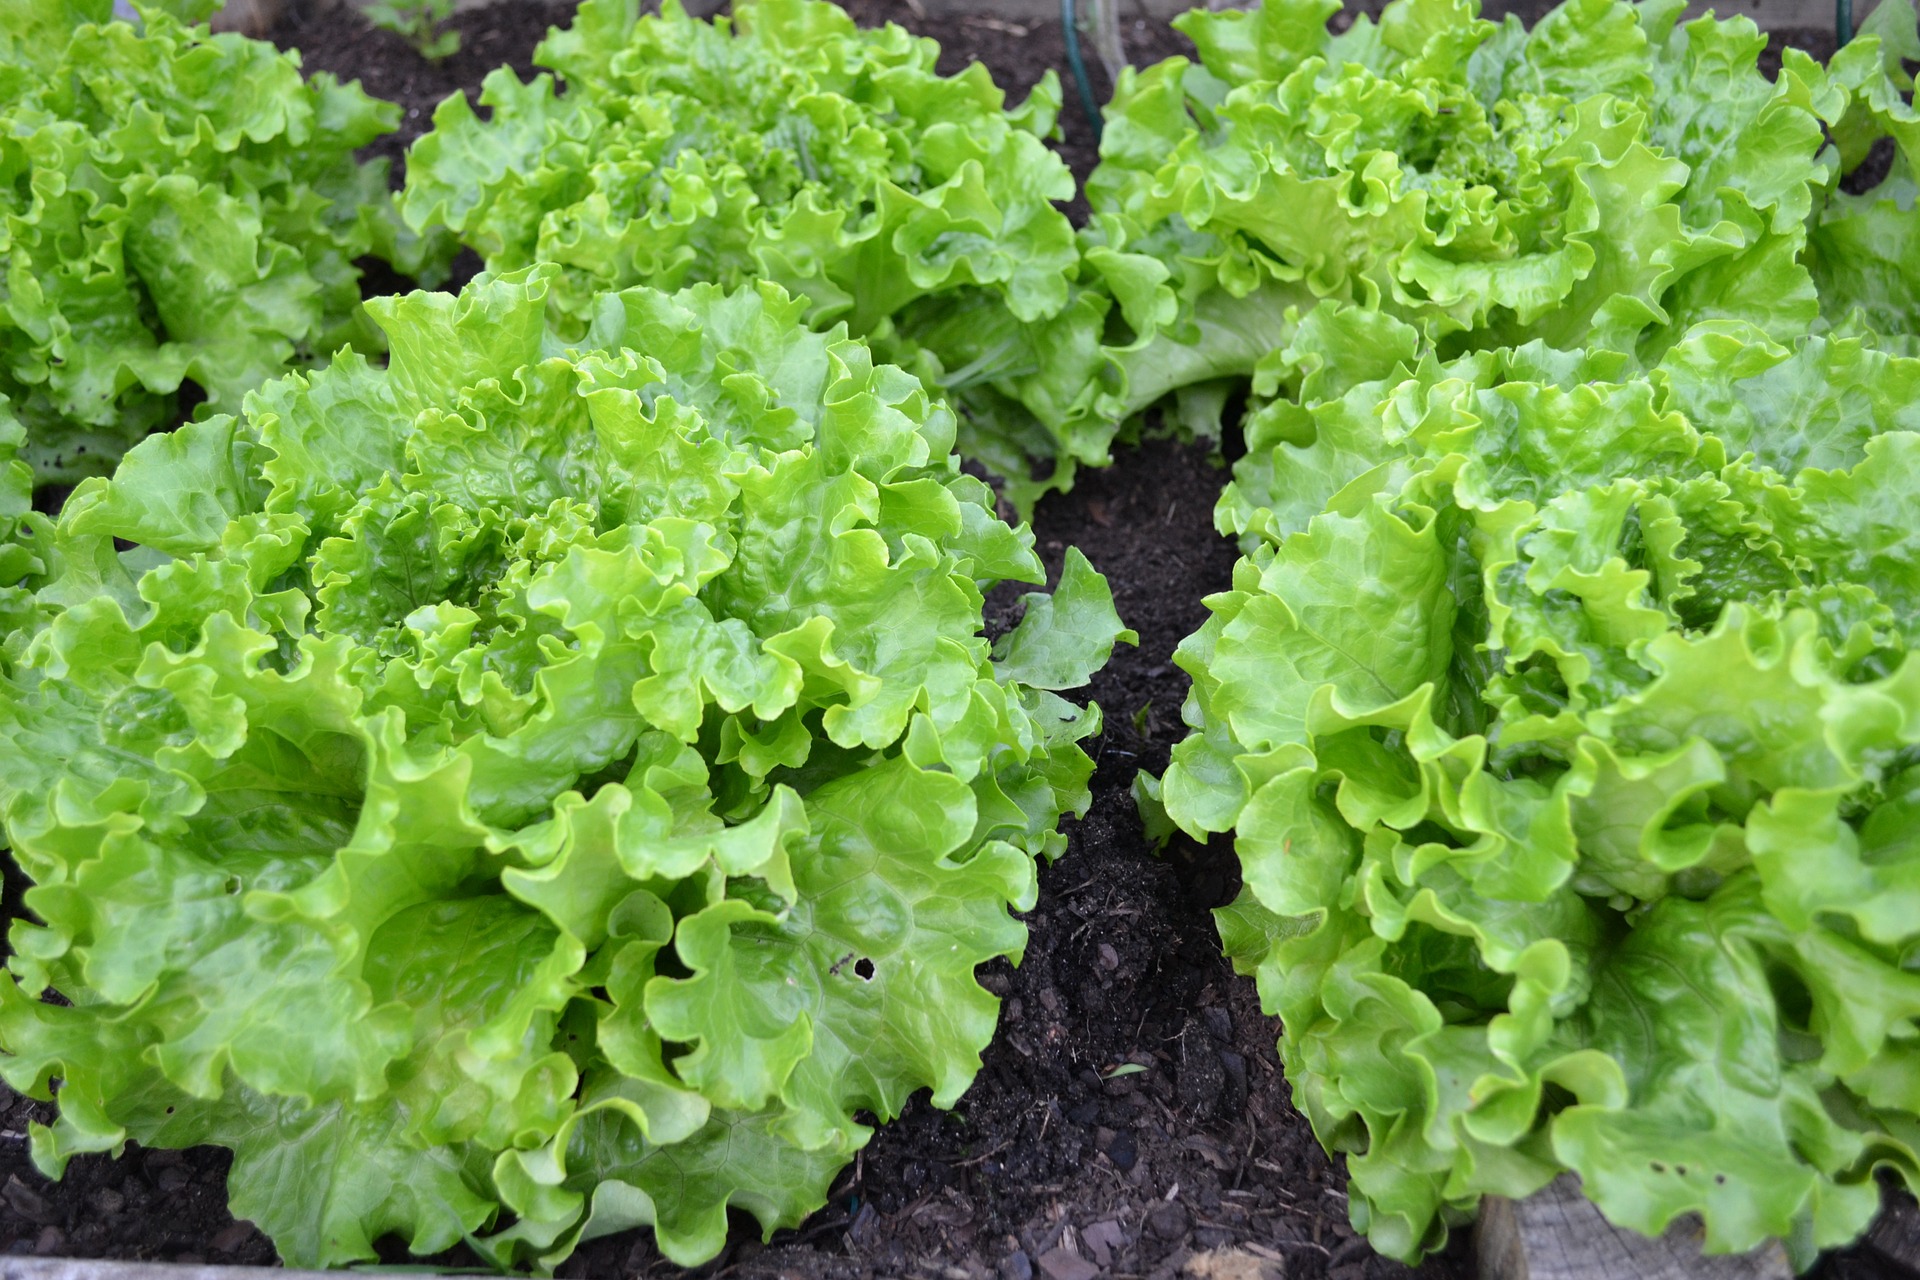 Lettuce: Nutrition and Health Benefits